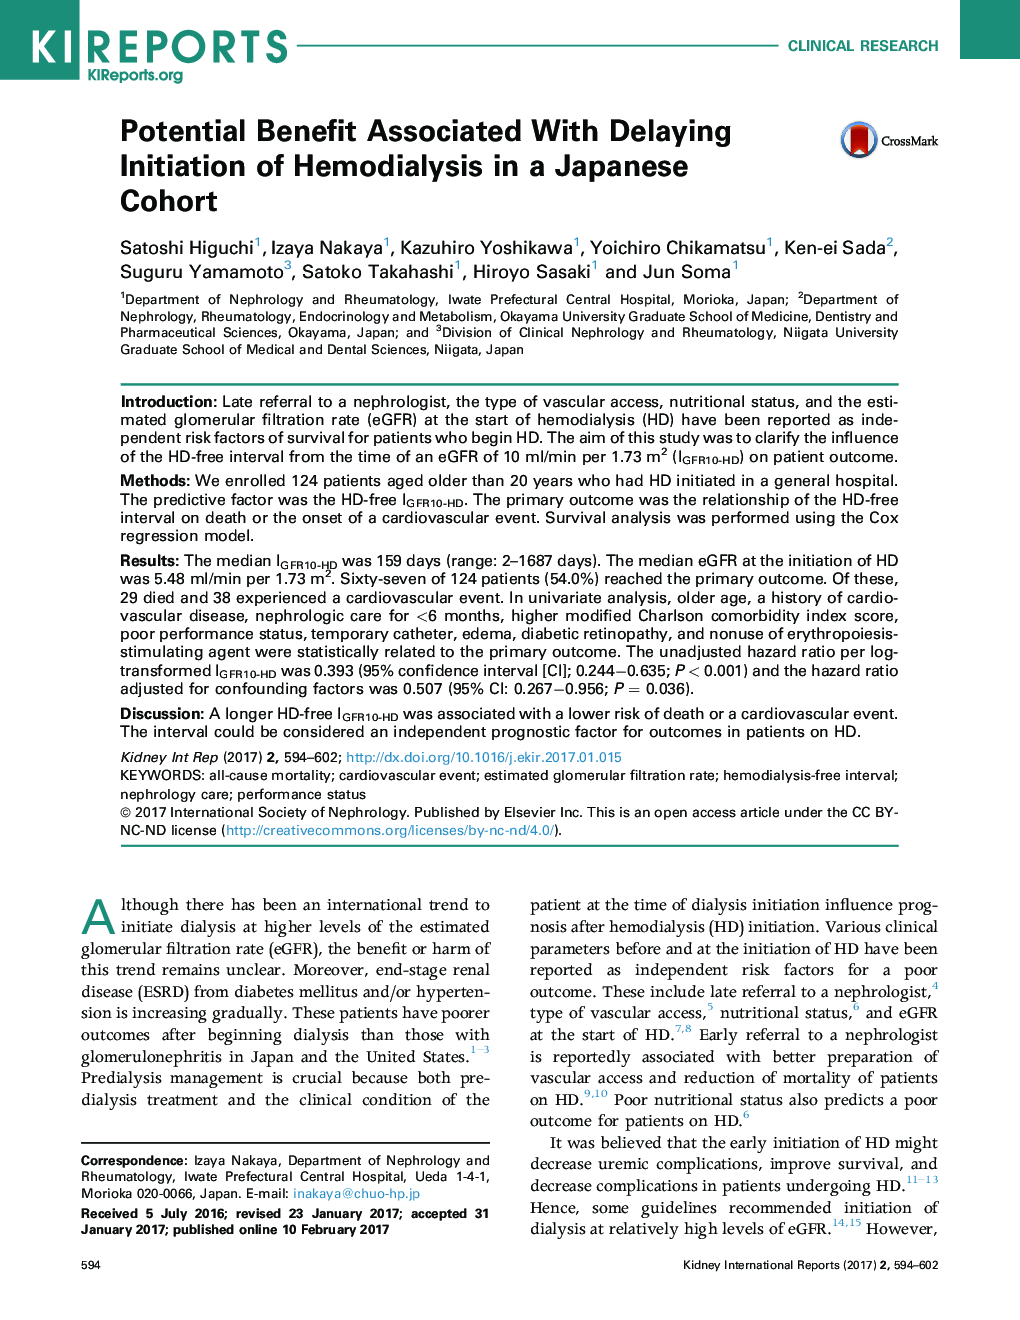 Potential Benefit Associated With Delaying Initiation of Hemodialysis in a Japanese Cohort